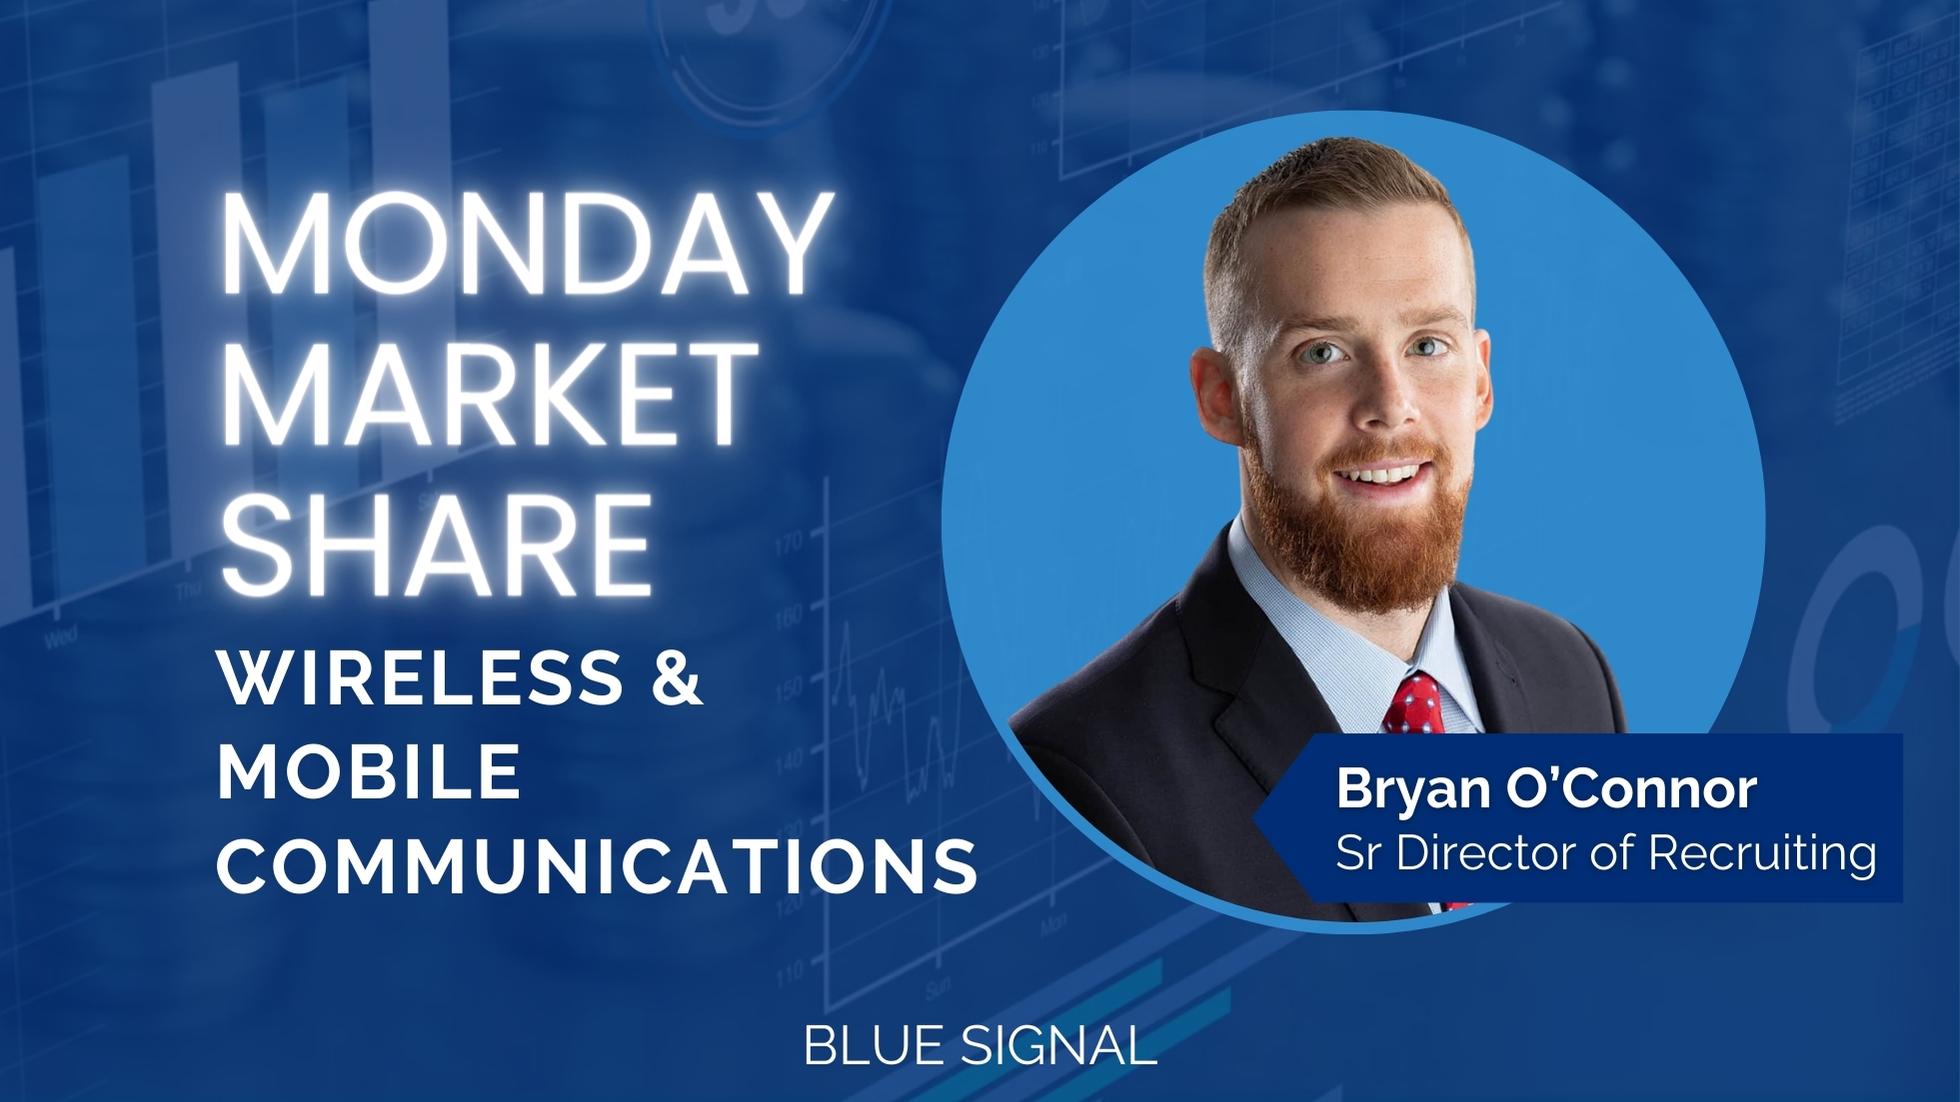 Blog banner displaying the title, "Monday Market Share: Wireless and Mobile Communications" with Bryan O'connor, Sr Director of Recruiting at Blue Signal with his headshot displayed behind his name and title.